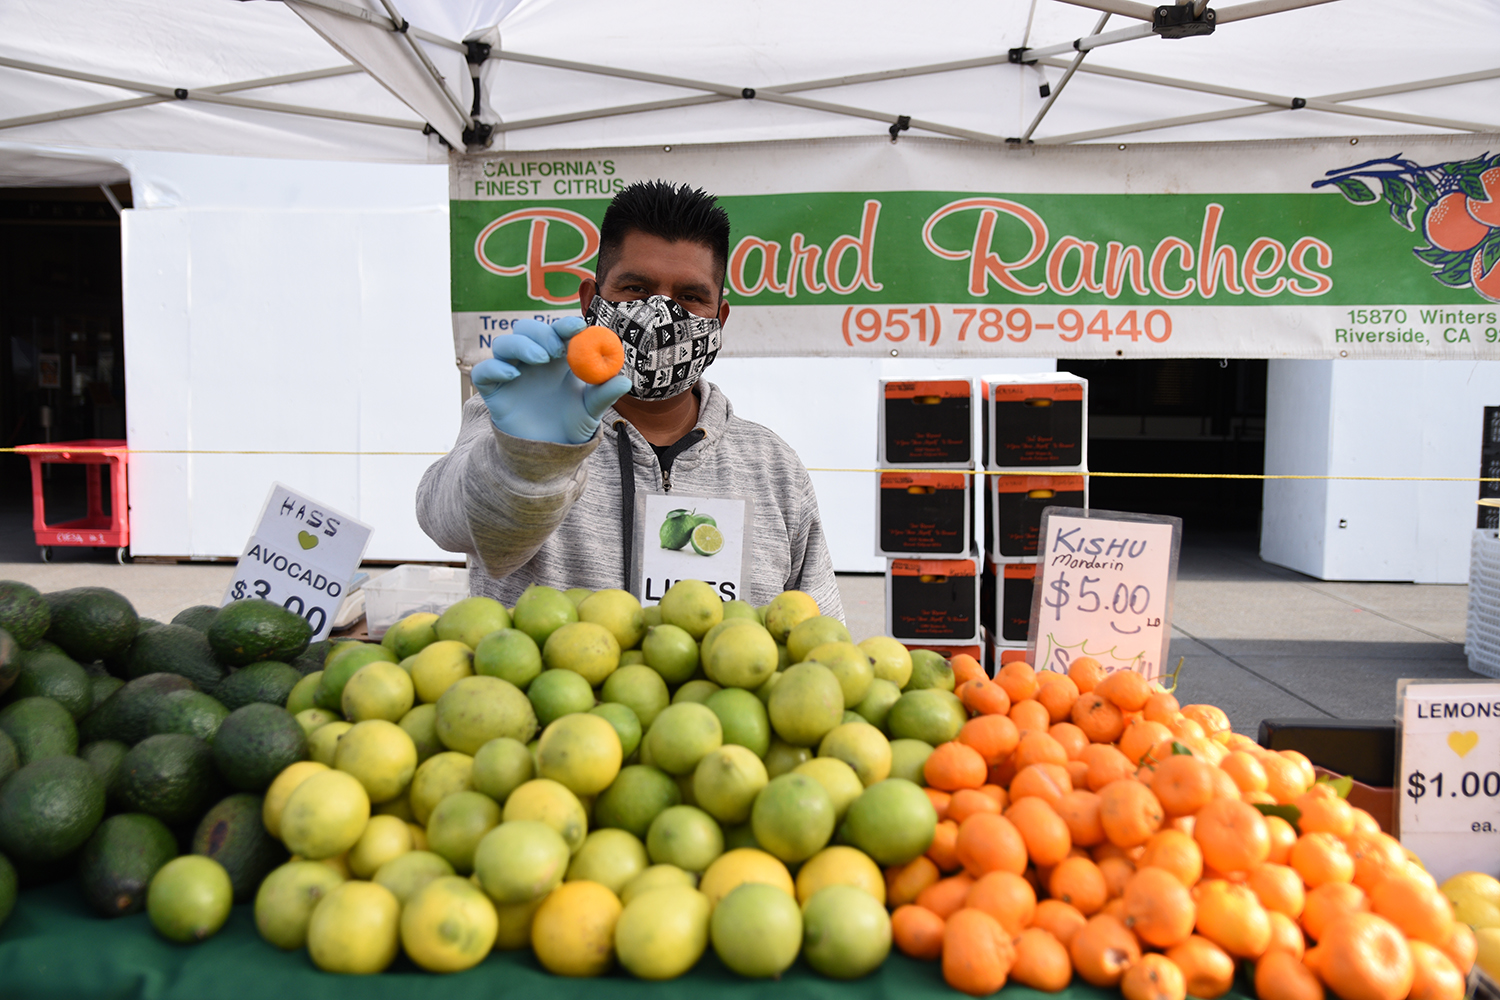 Bernard Ranches with citrus at Ferry Plaza Farmers Market stand